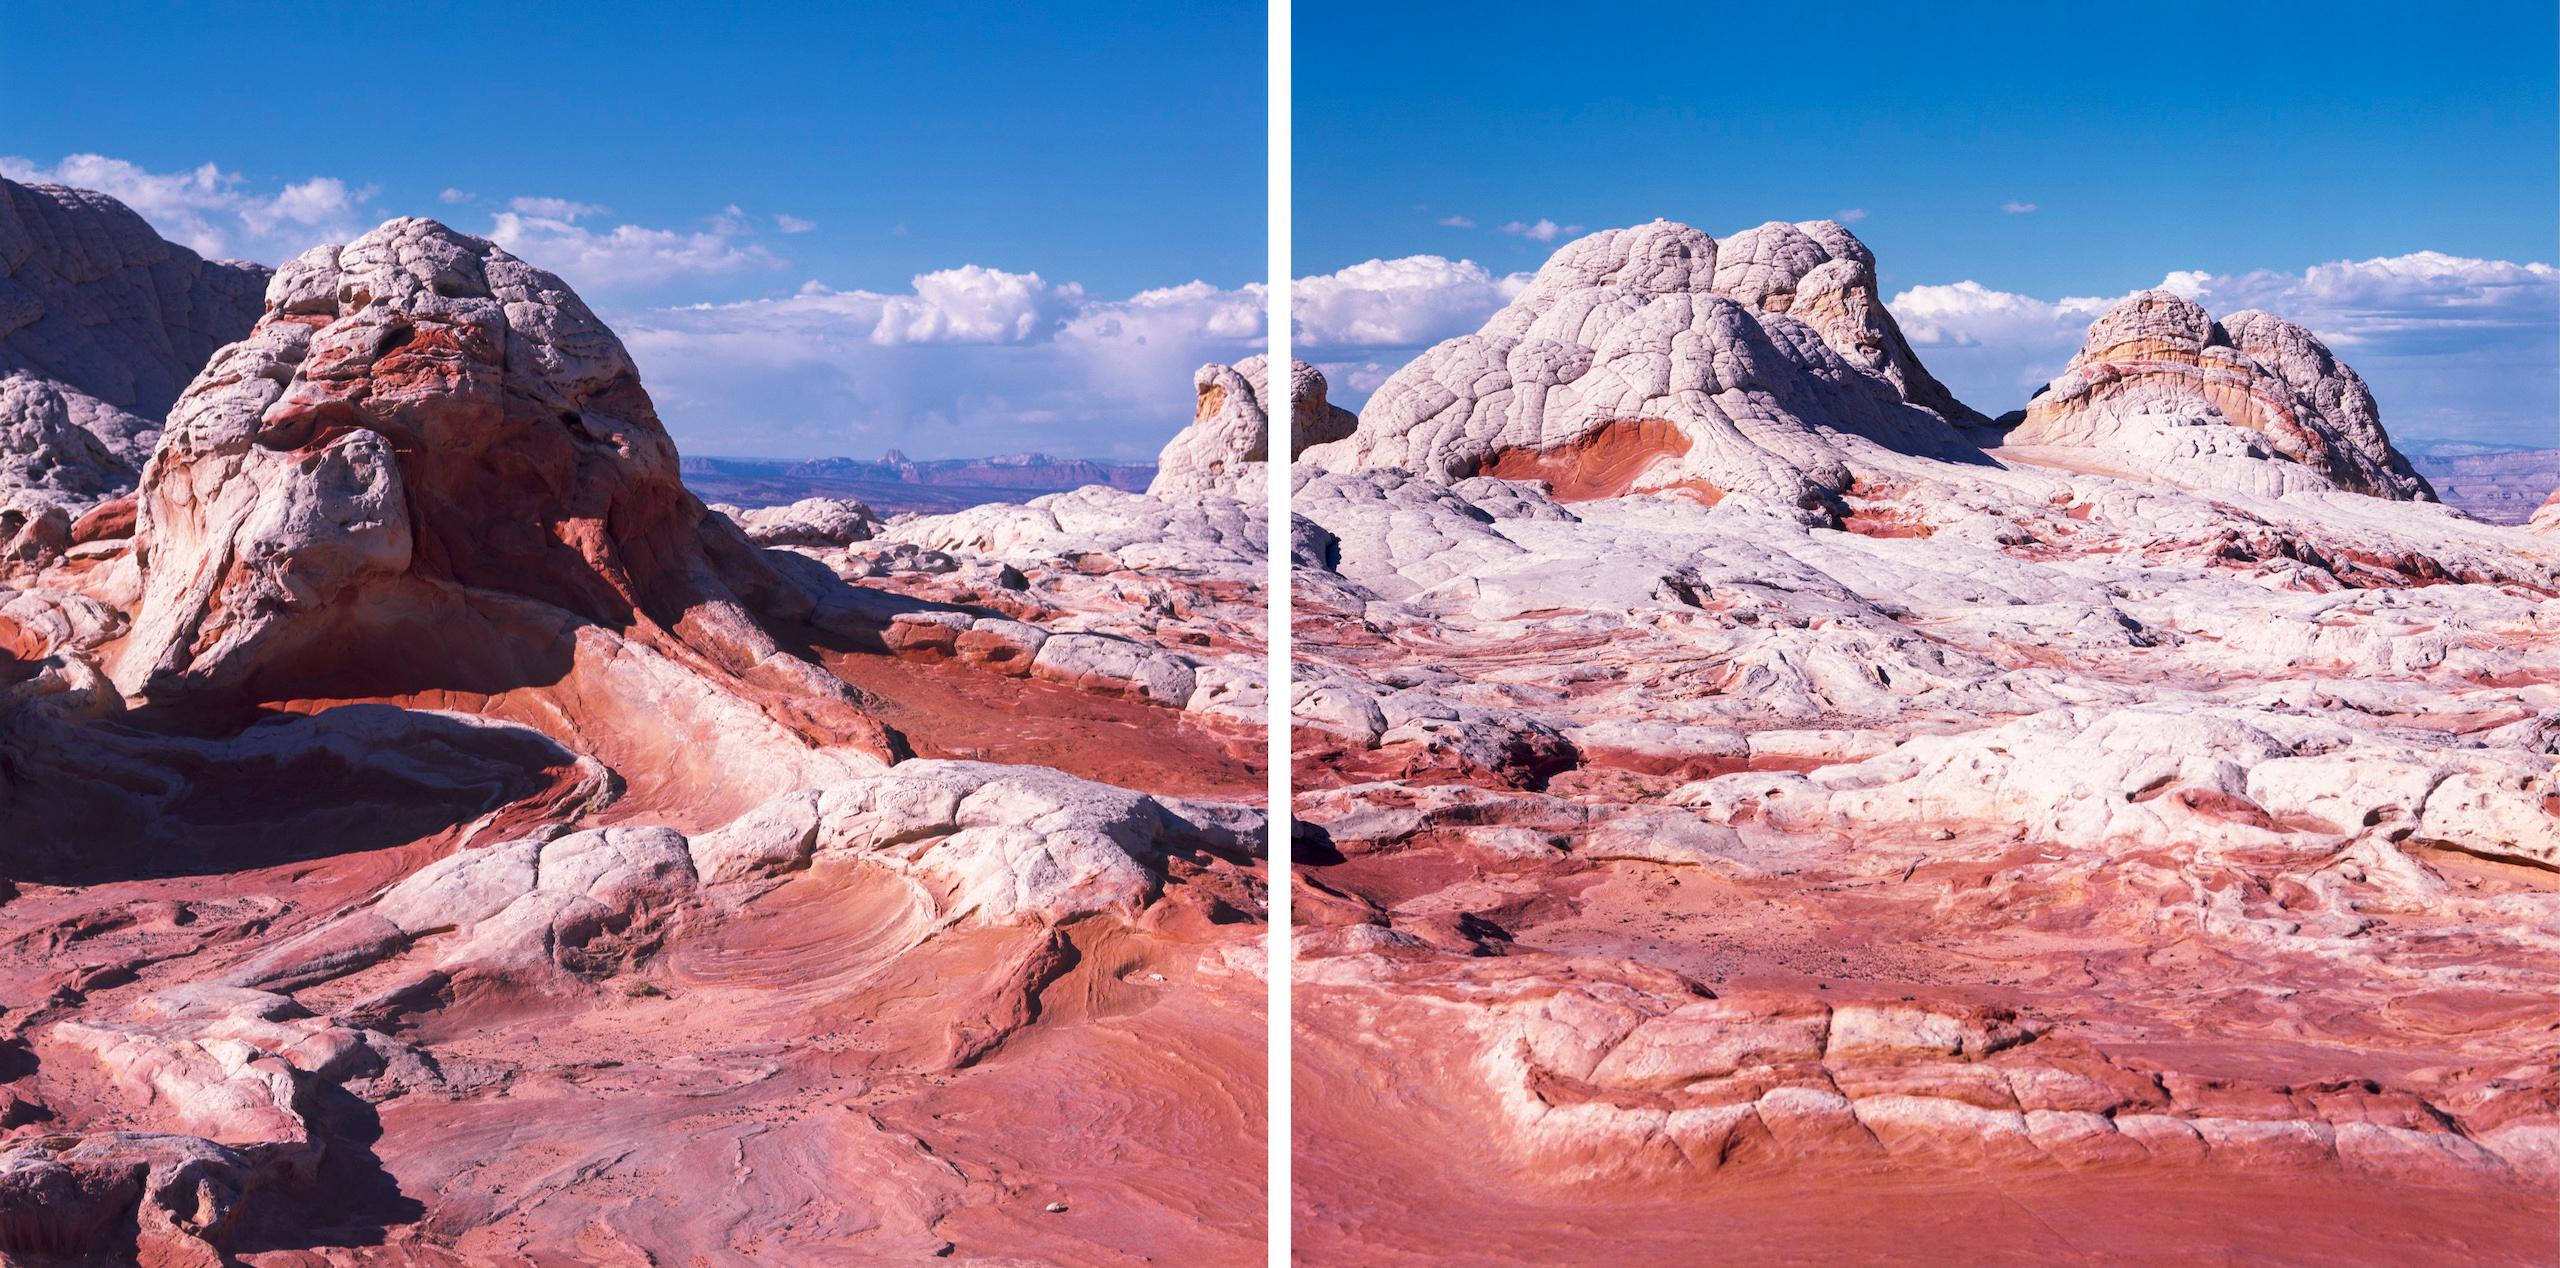 Strata VII is a limited-edition diptych photograph by contemporary artist Luca Marziale. 

This photograph is sold unframed as a print only. It is available in 2 sizes:
*76.2 cm × 152.4 cm (30" × 60"), edition of 10 copies
*114.3 cm × 228.6 cm (45"